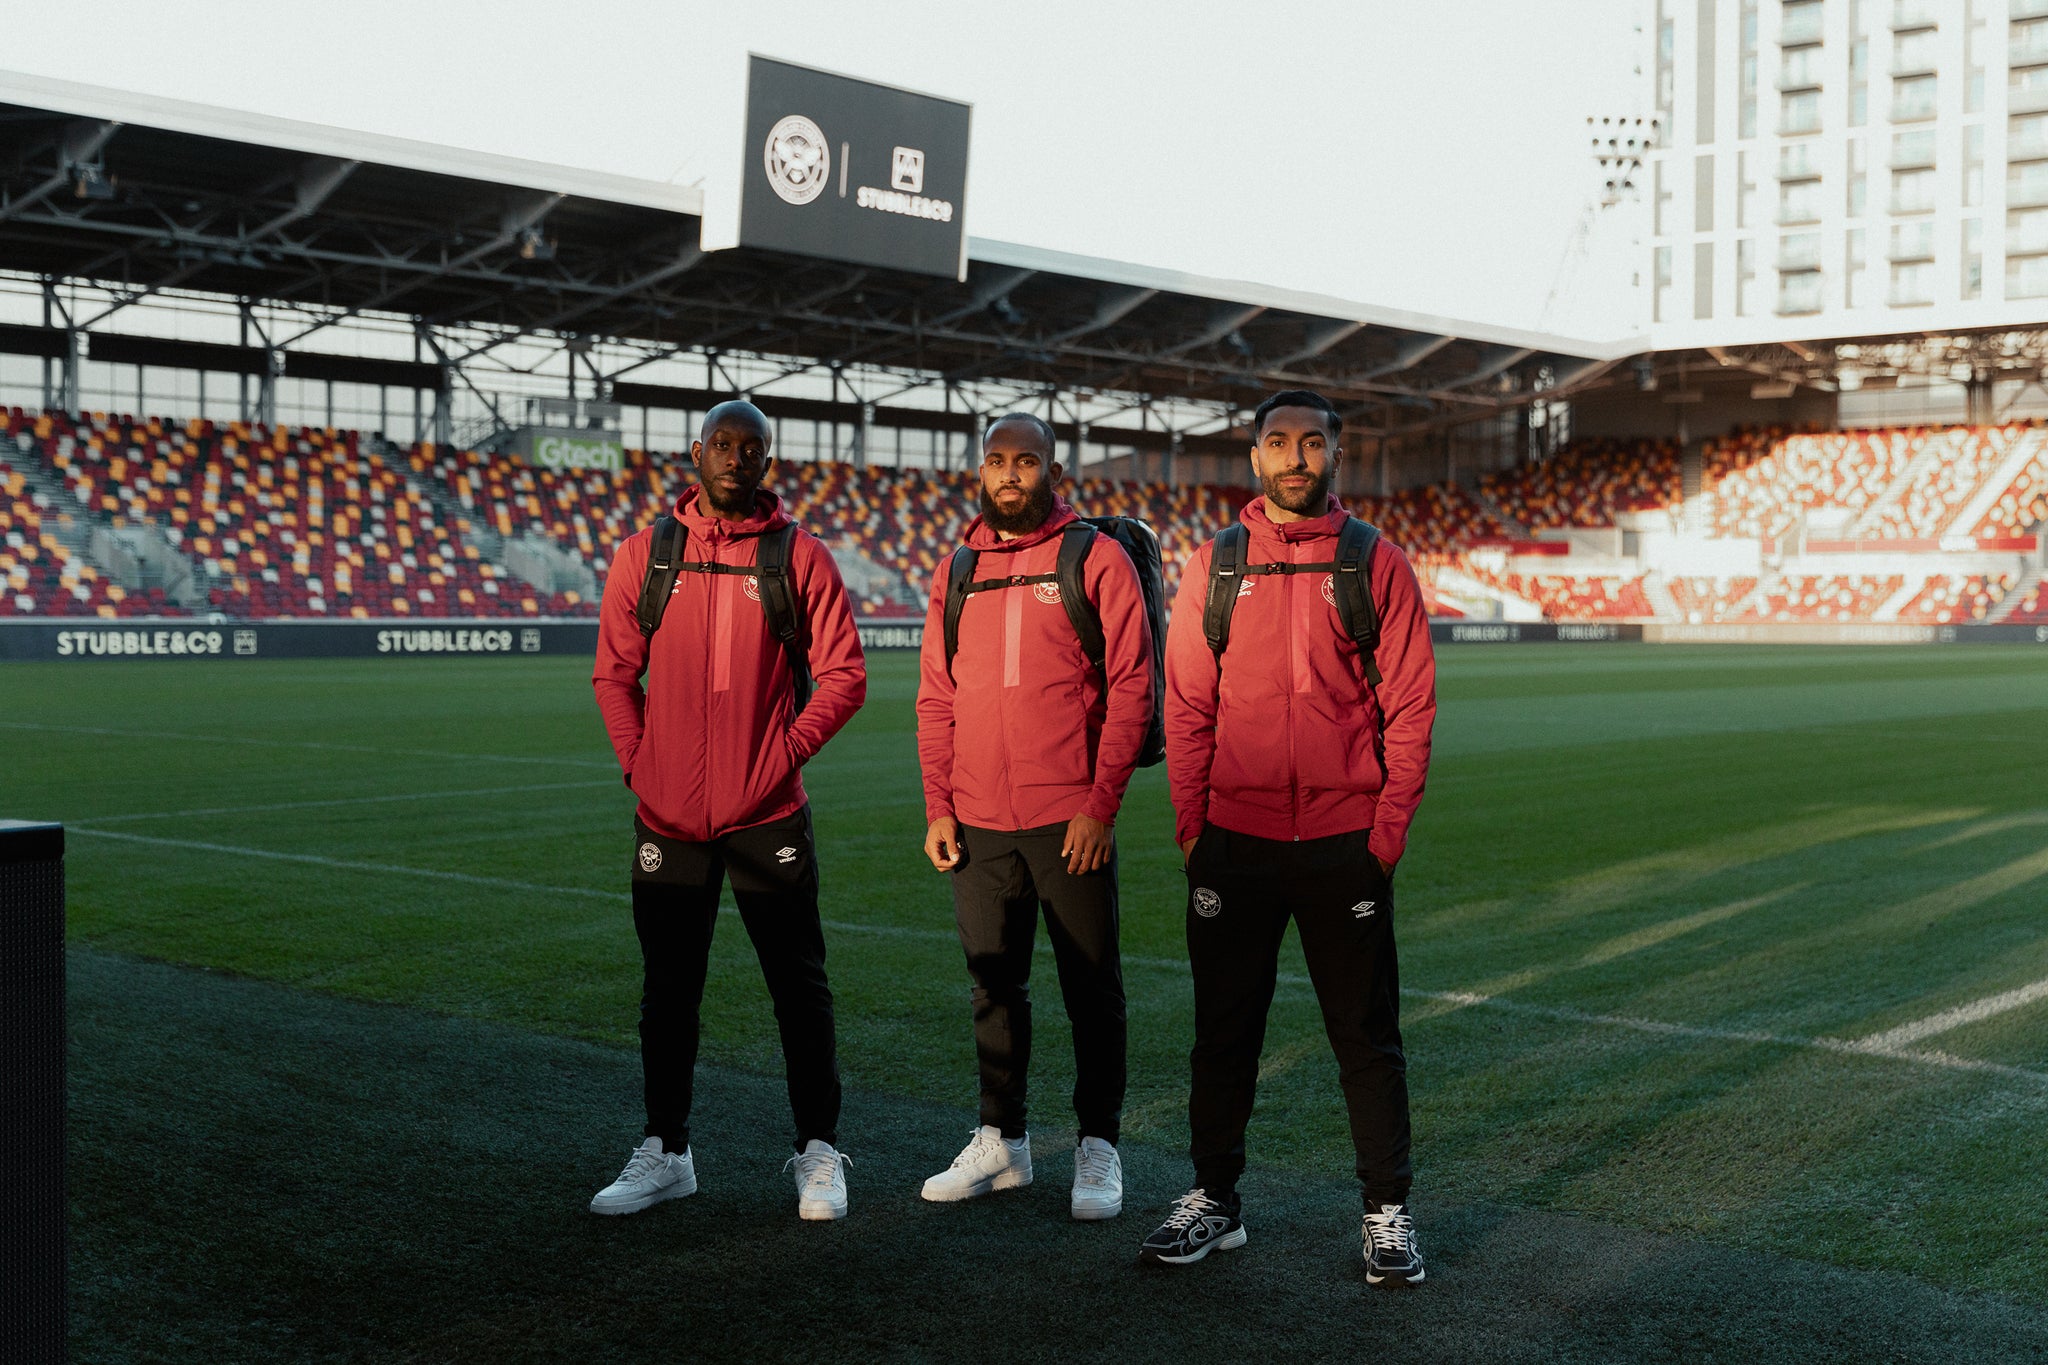 Brentford football players on the pitch with Stubble & Co backpacks